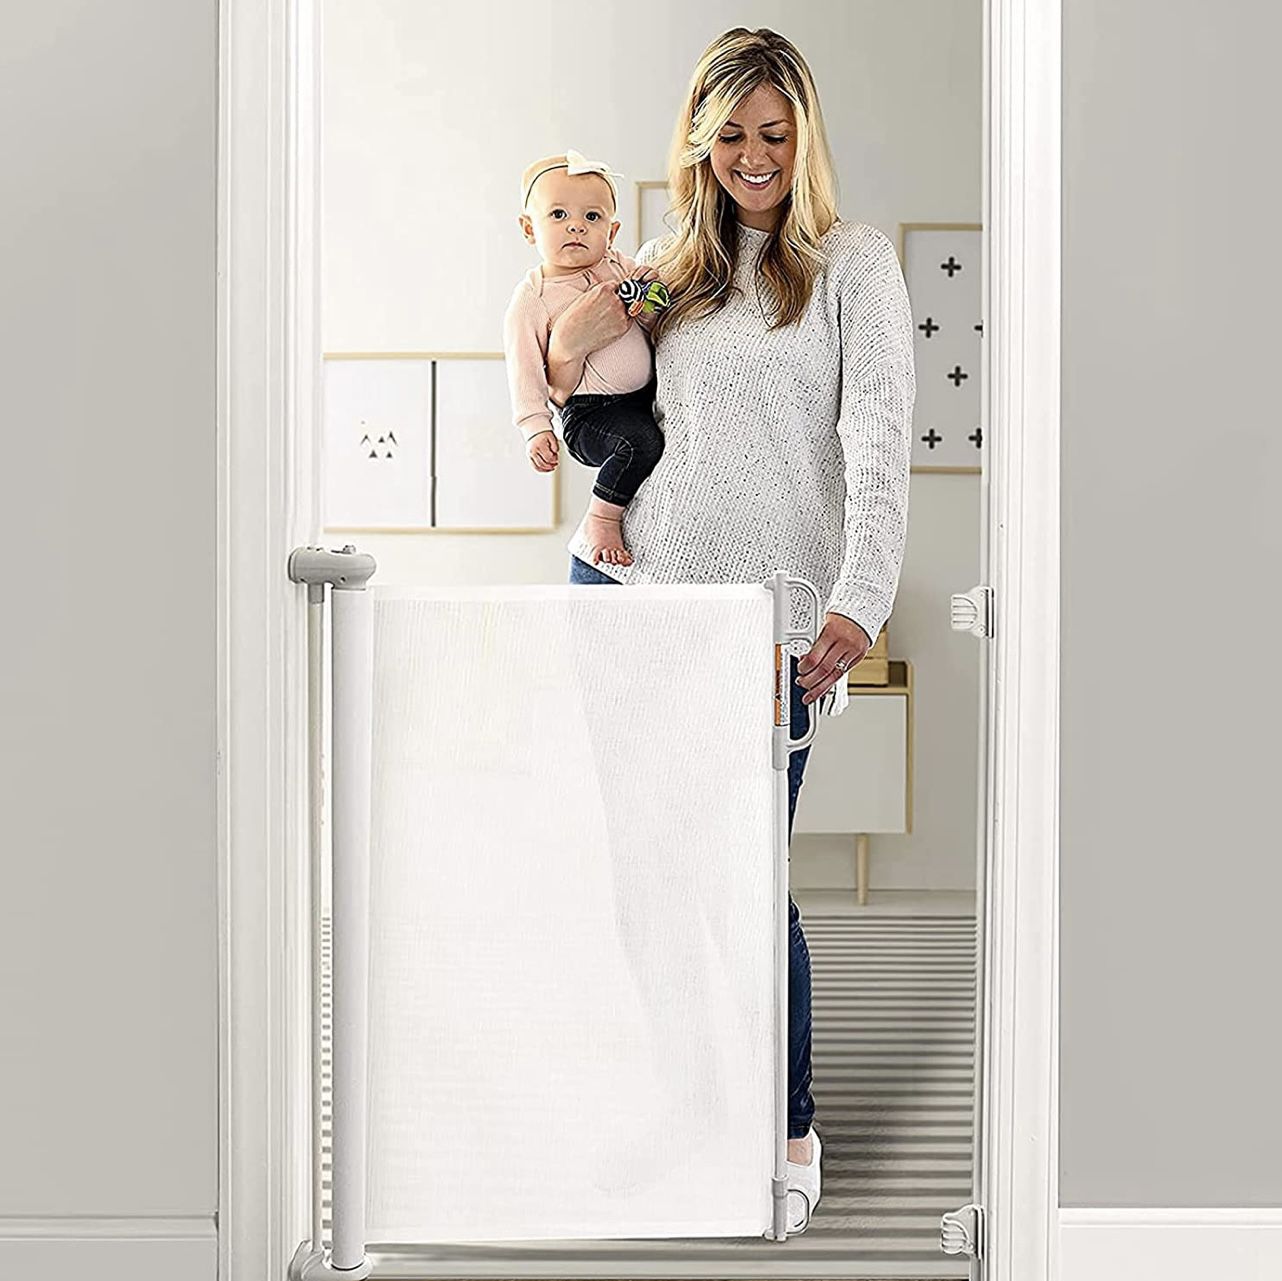  Momcozy Retractable Baby Gate, 33" Tall, Extends up to 55" Wide